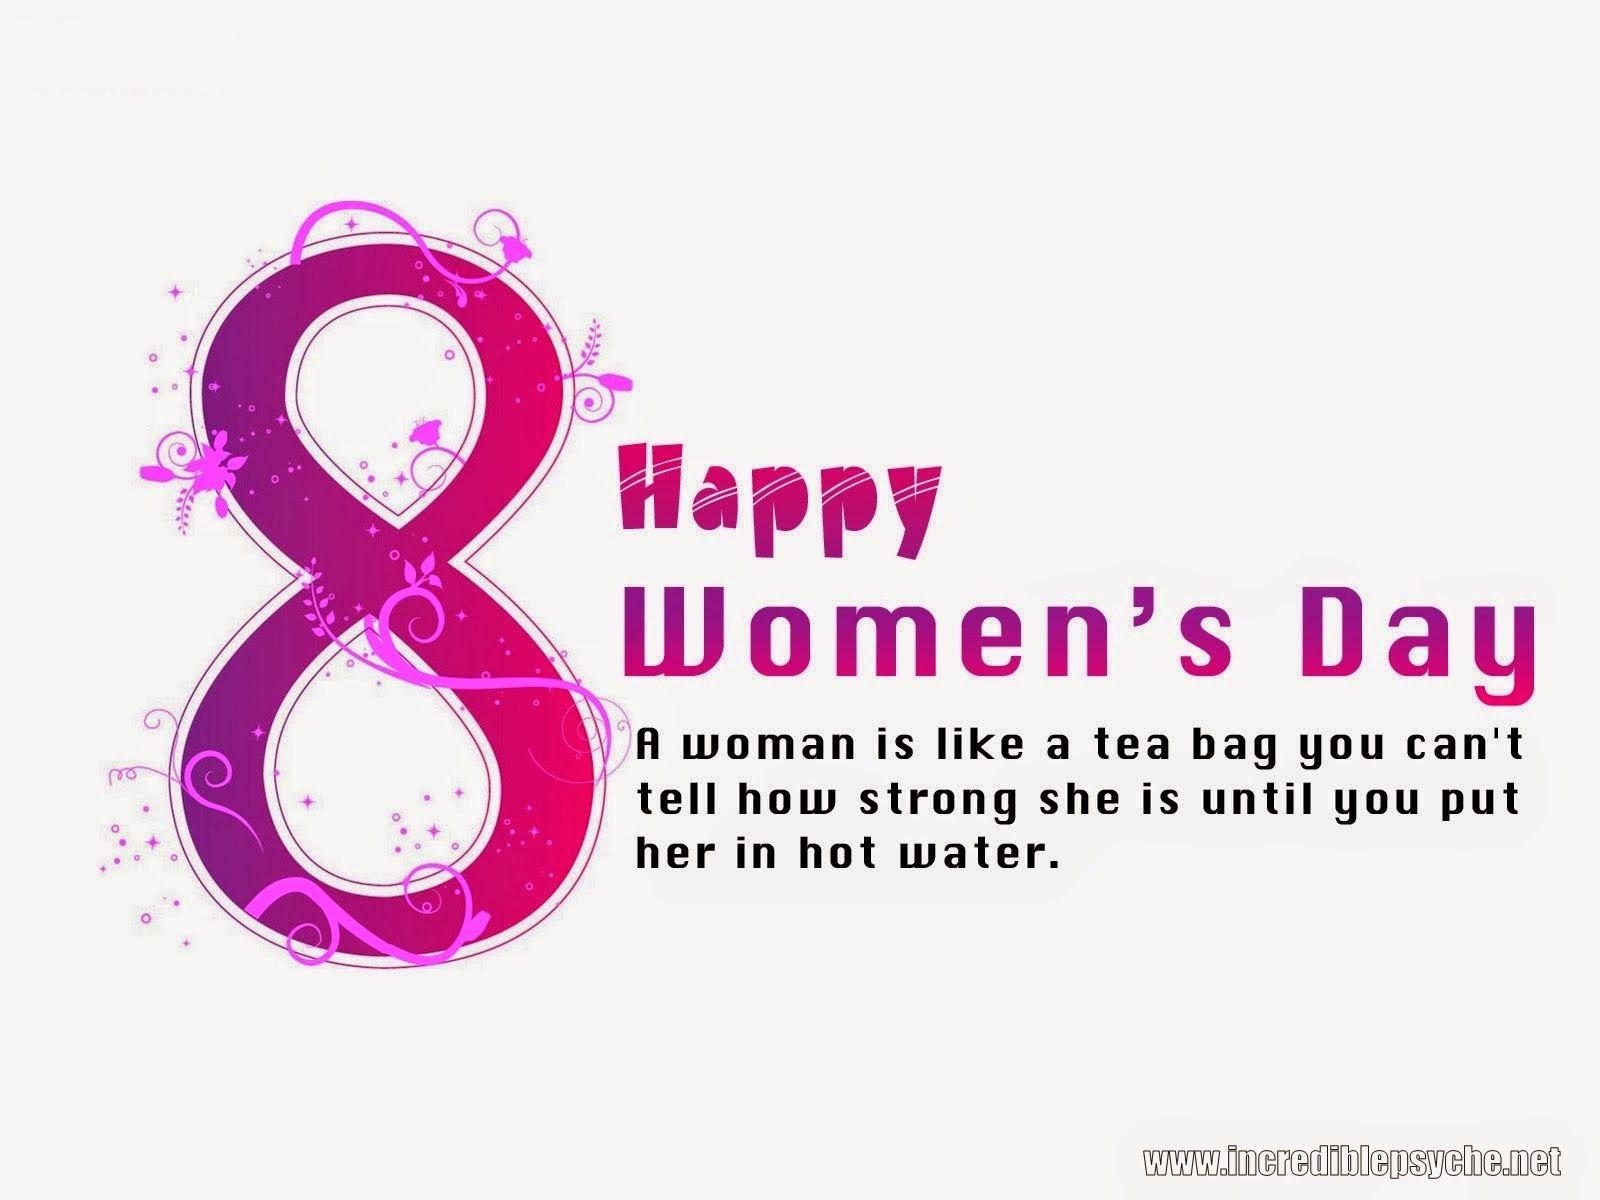 Happy International Women's Day Wishes, Messages, Greetings and HD